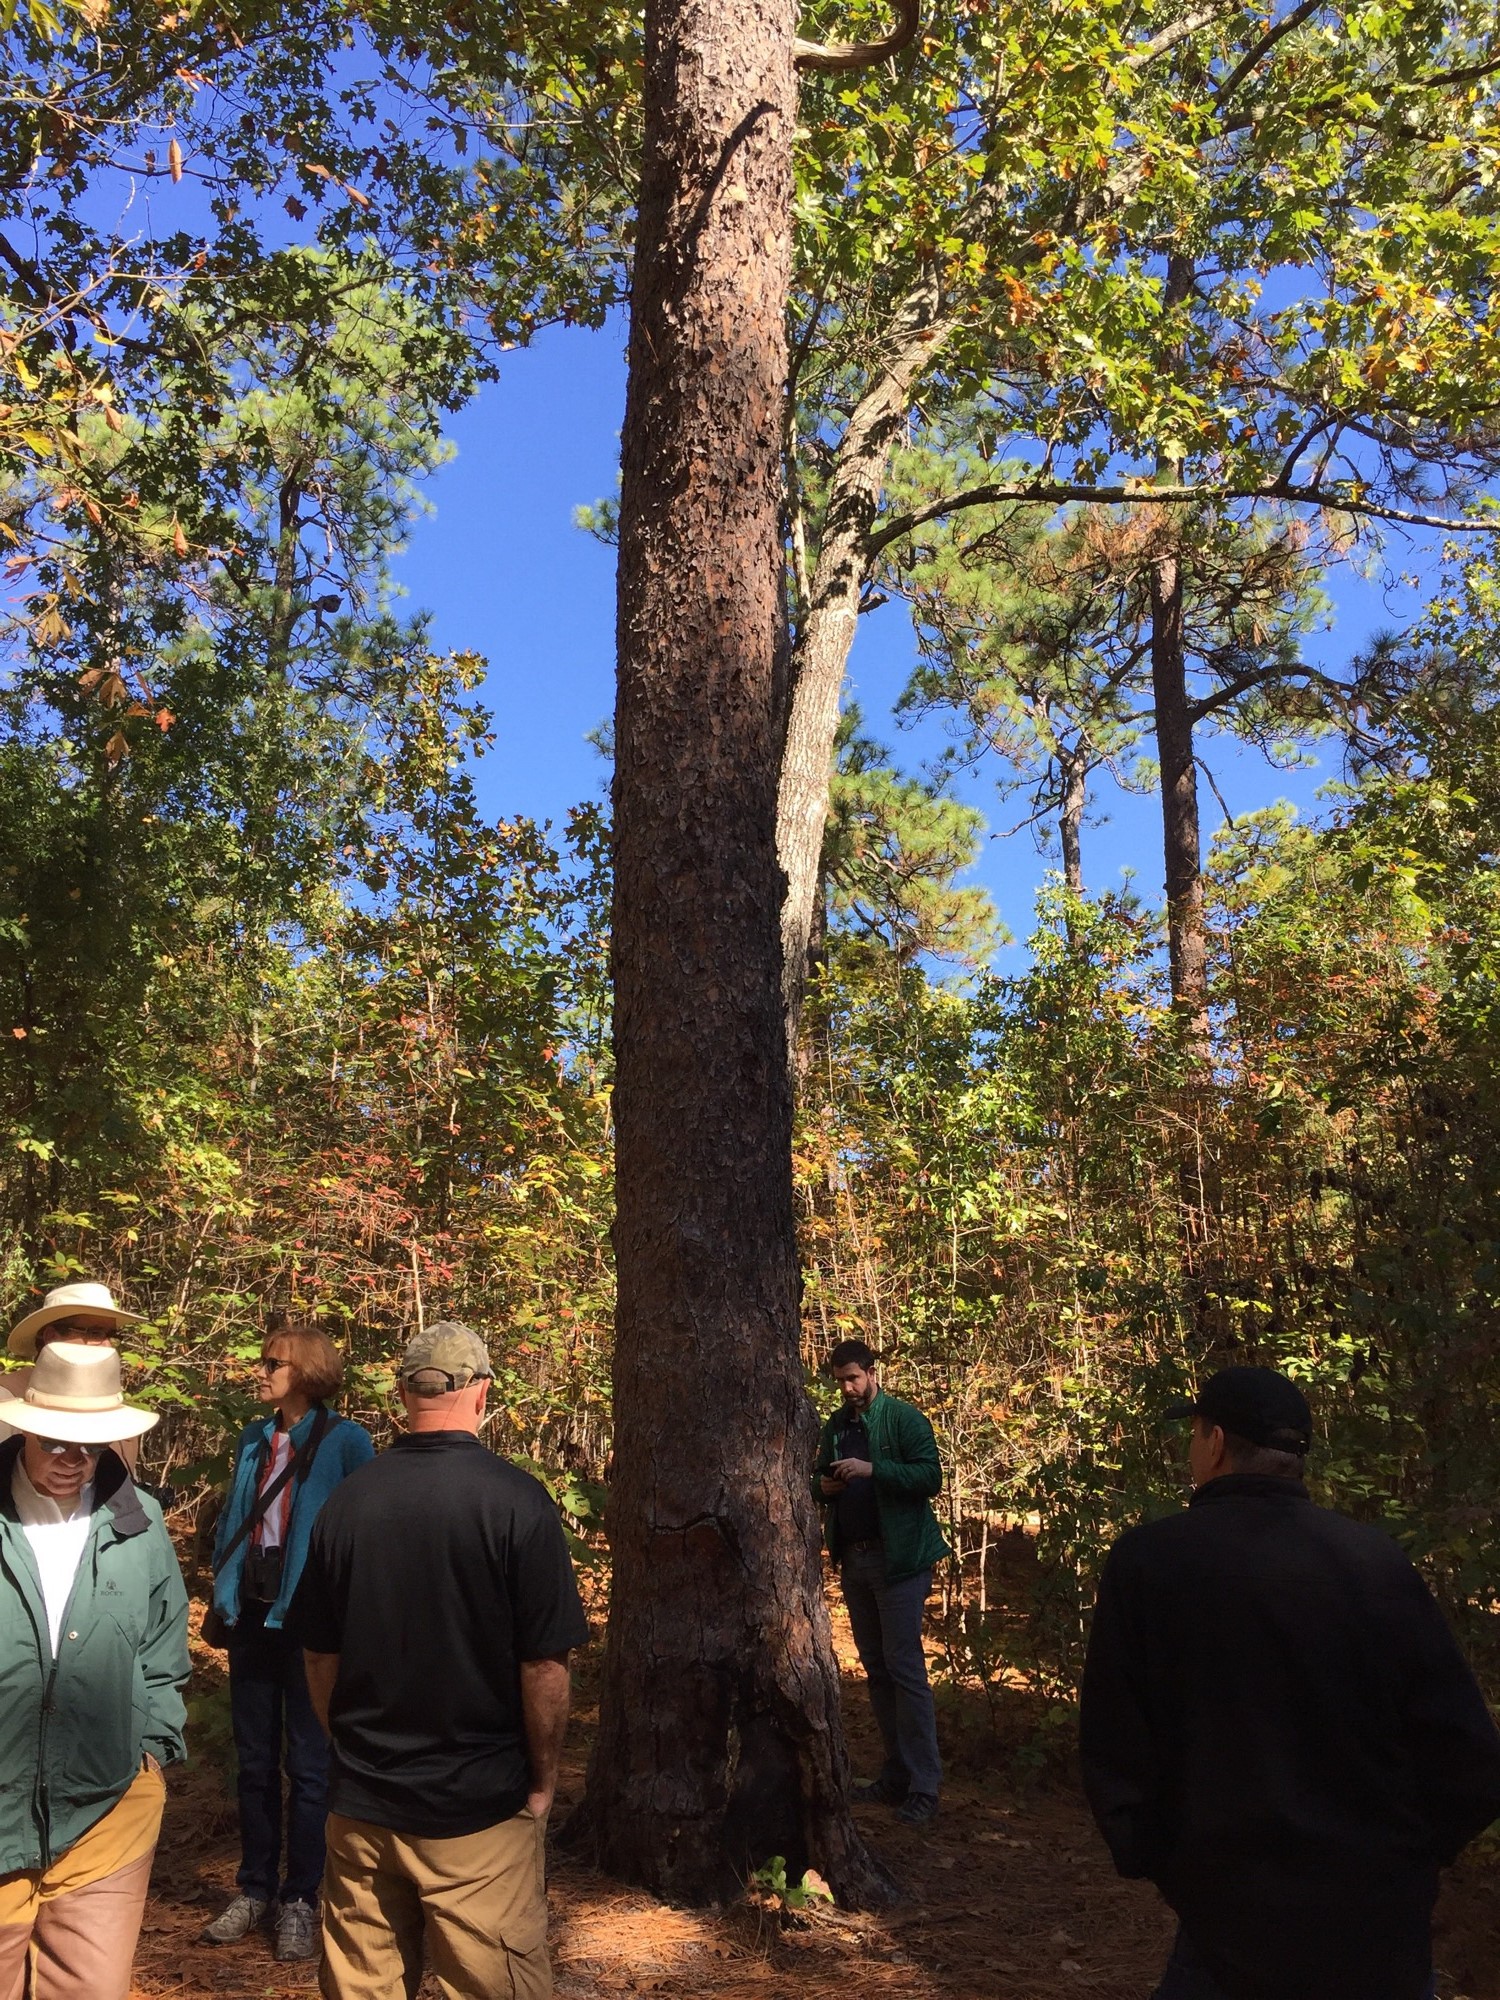 The oldest longleaf pine at Weymouth Woods. Photo Credit: Addie Thornton with SERPPAS